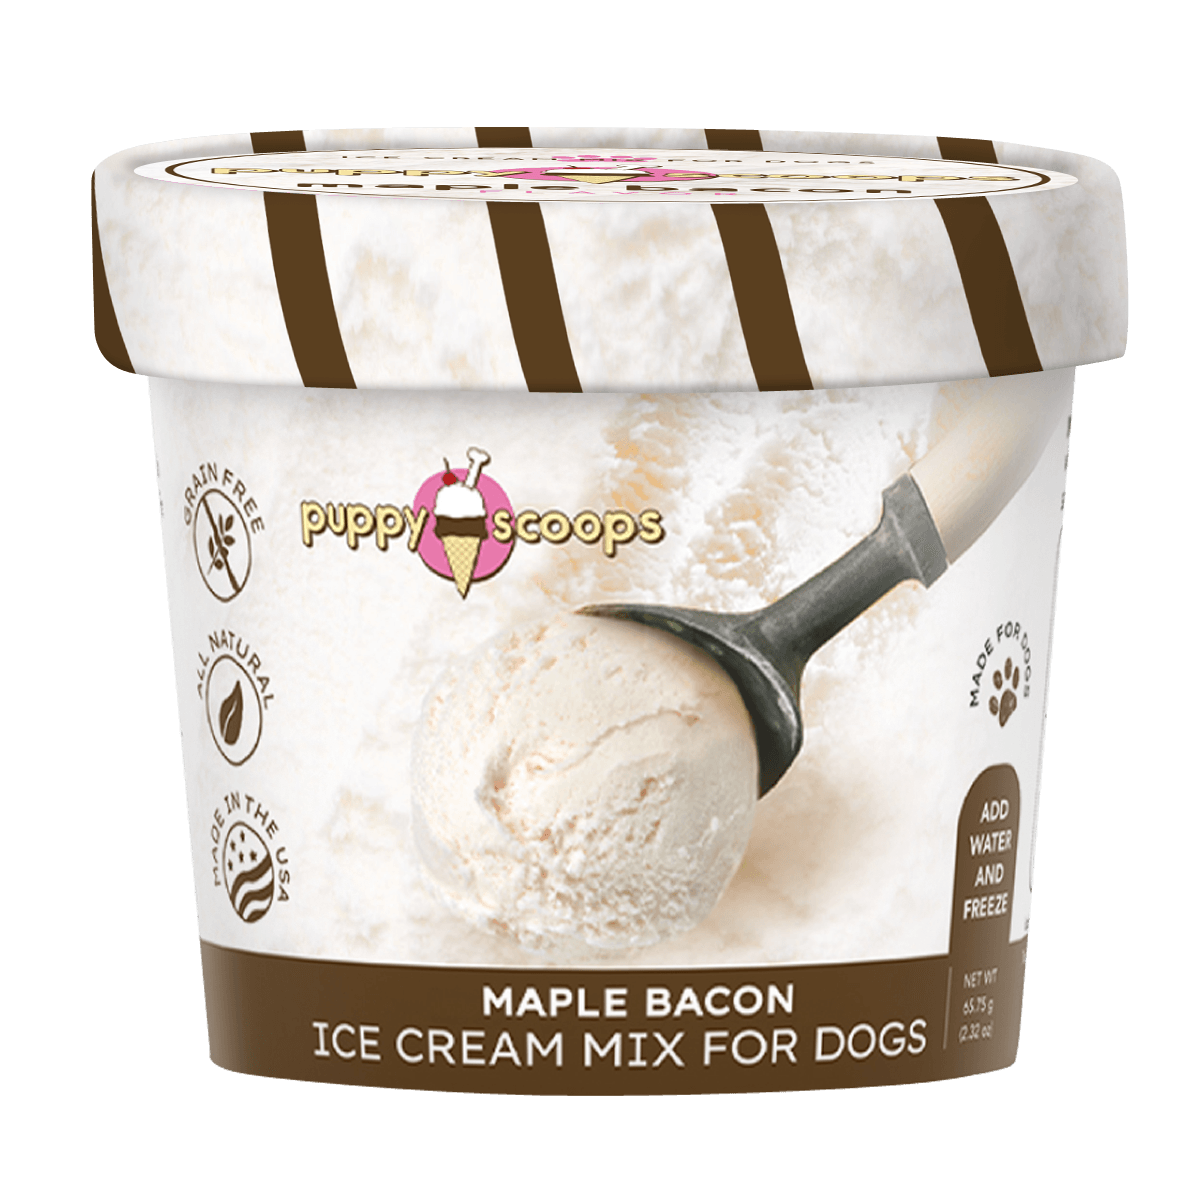 Puppy Scoops Ice Cream Mix For Dogs - Maple Bacon FajarShuruqSA